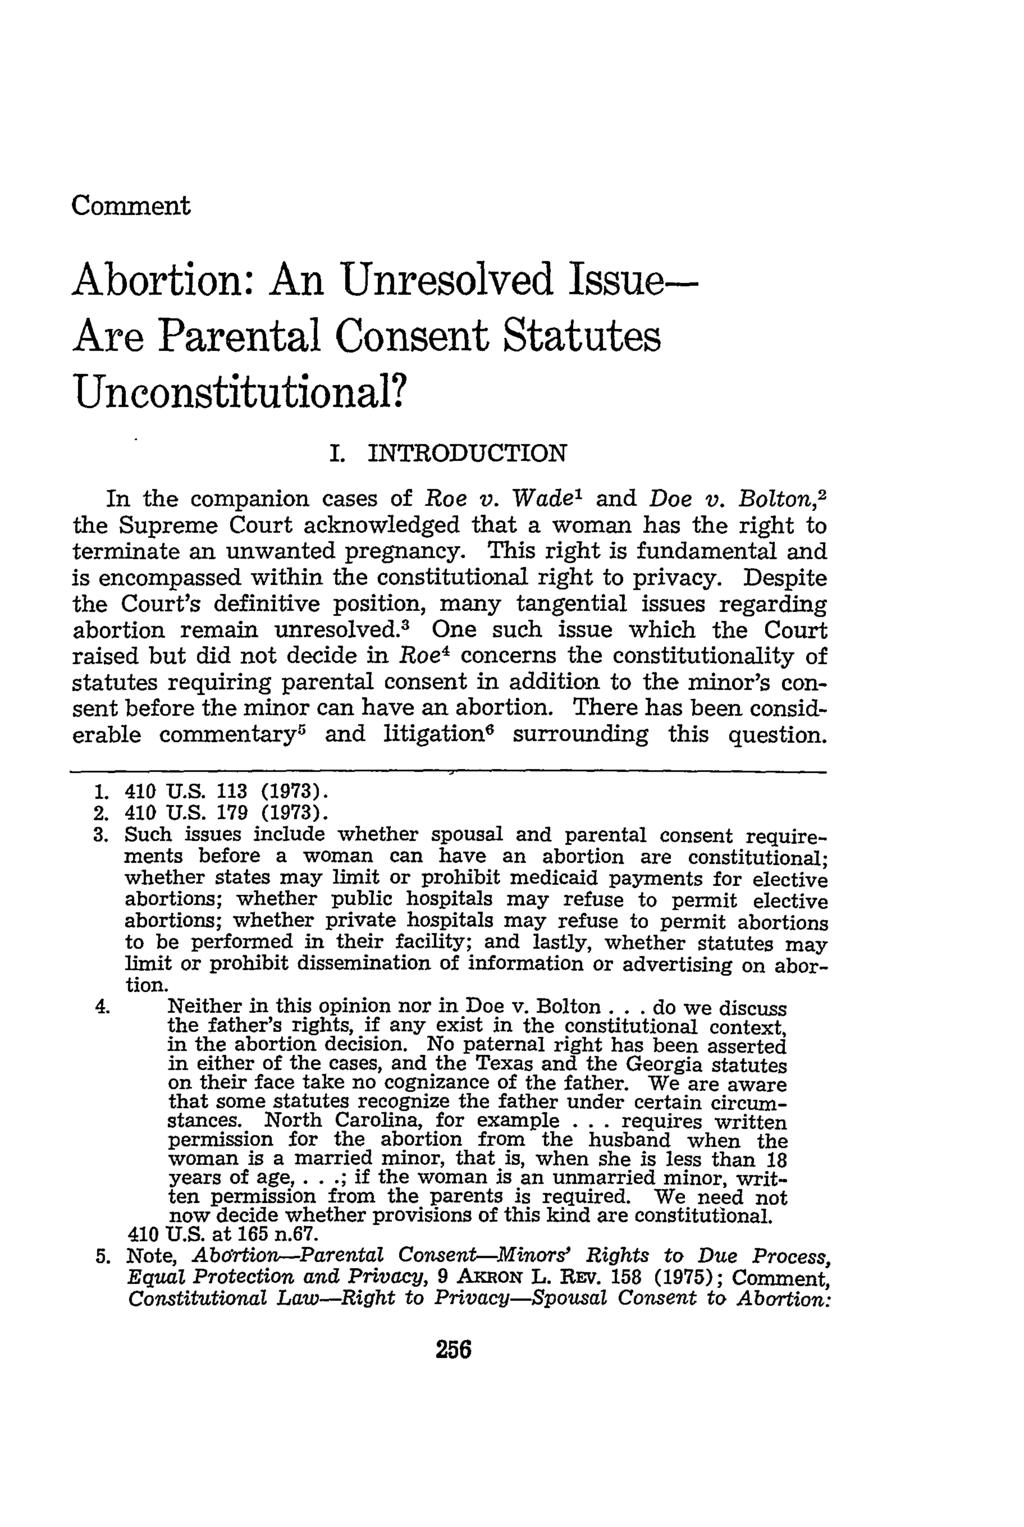 Comment Abortion: An Unresolved Issue- Are Parental Consent Statutes Unconstitutional? I. INTRODUCTION In the companion cases of Roe v. Wade' and Doe v.